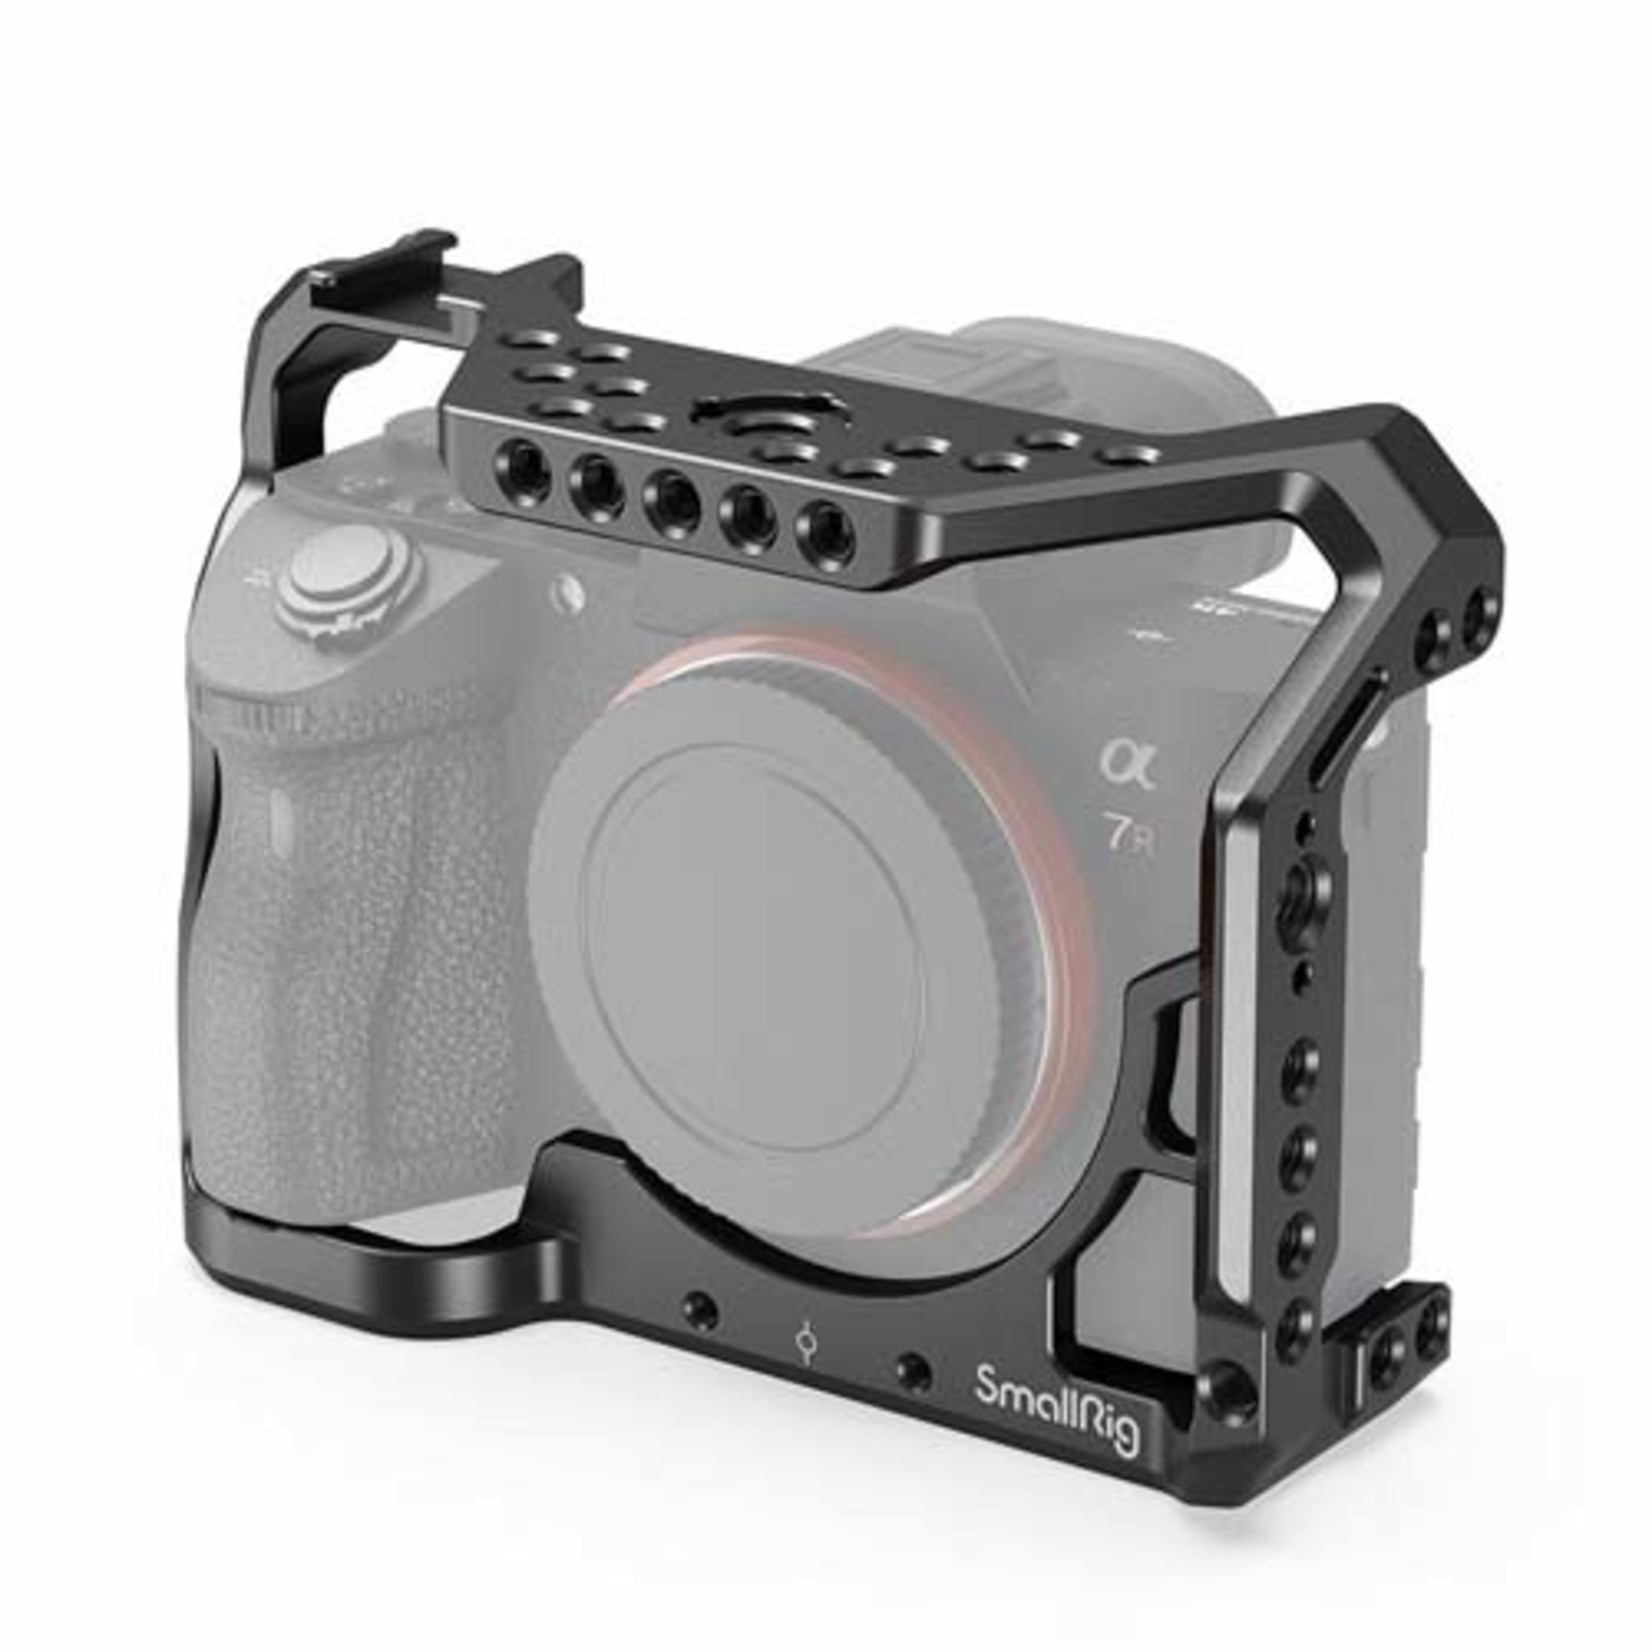 SmallRig SmallRig Camera Cage for Sony a7R III and a7 III Series